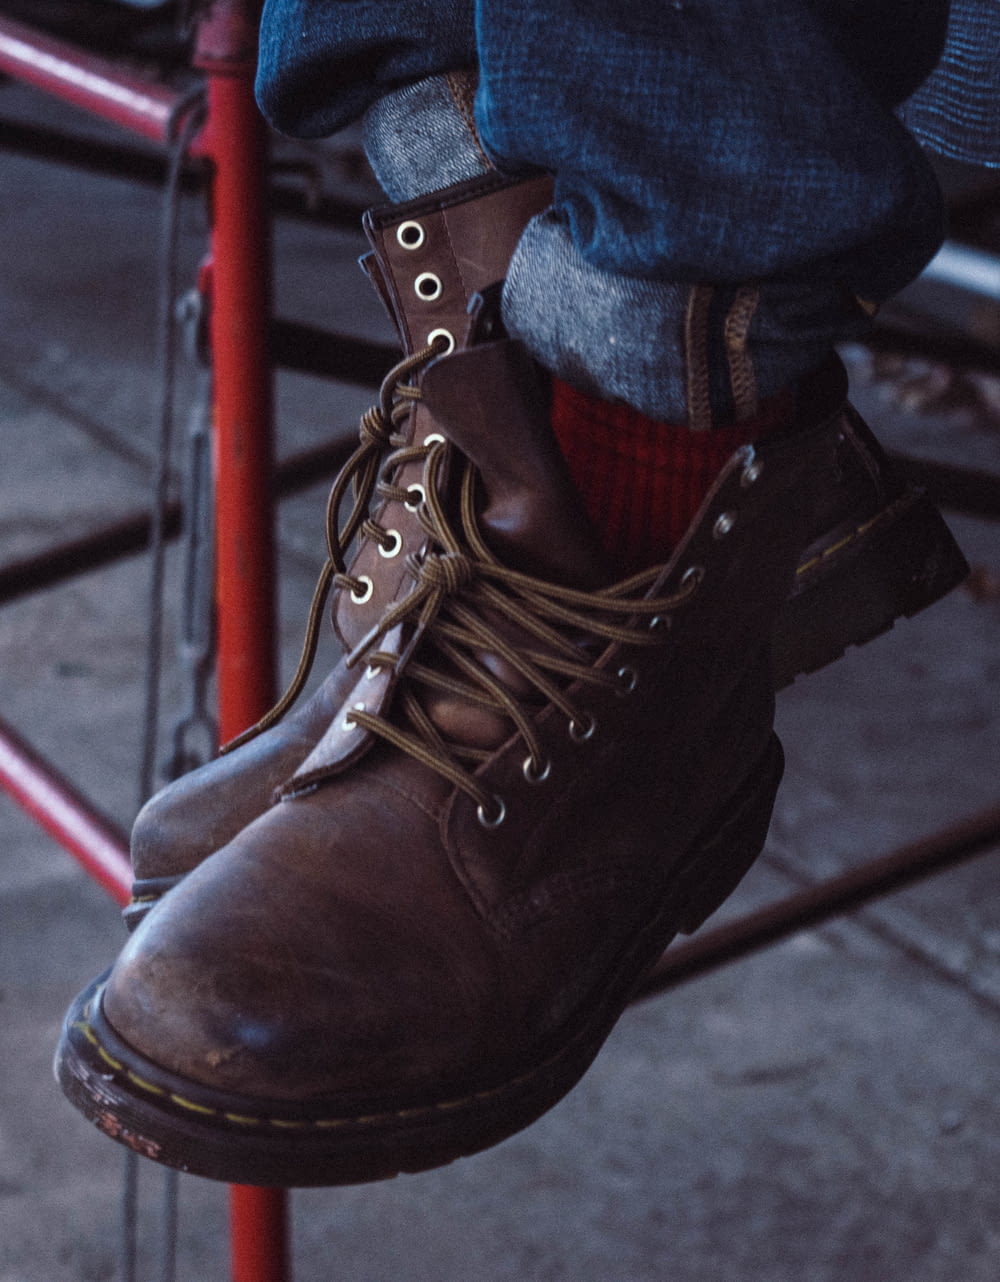 person wearing brown leather boots